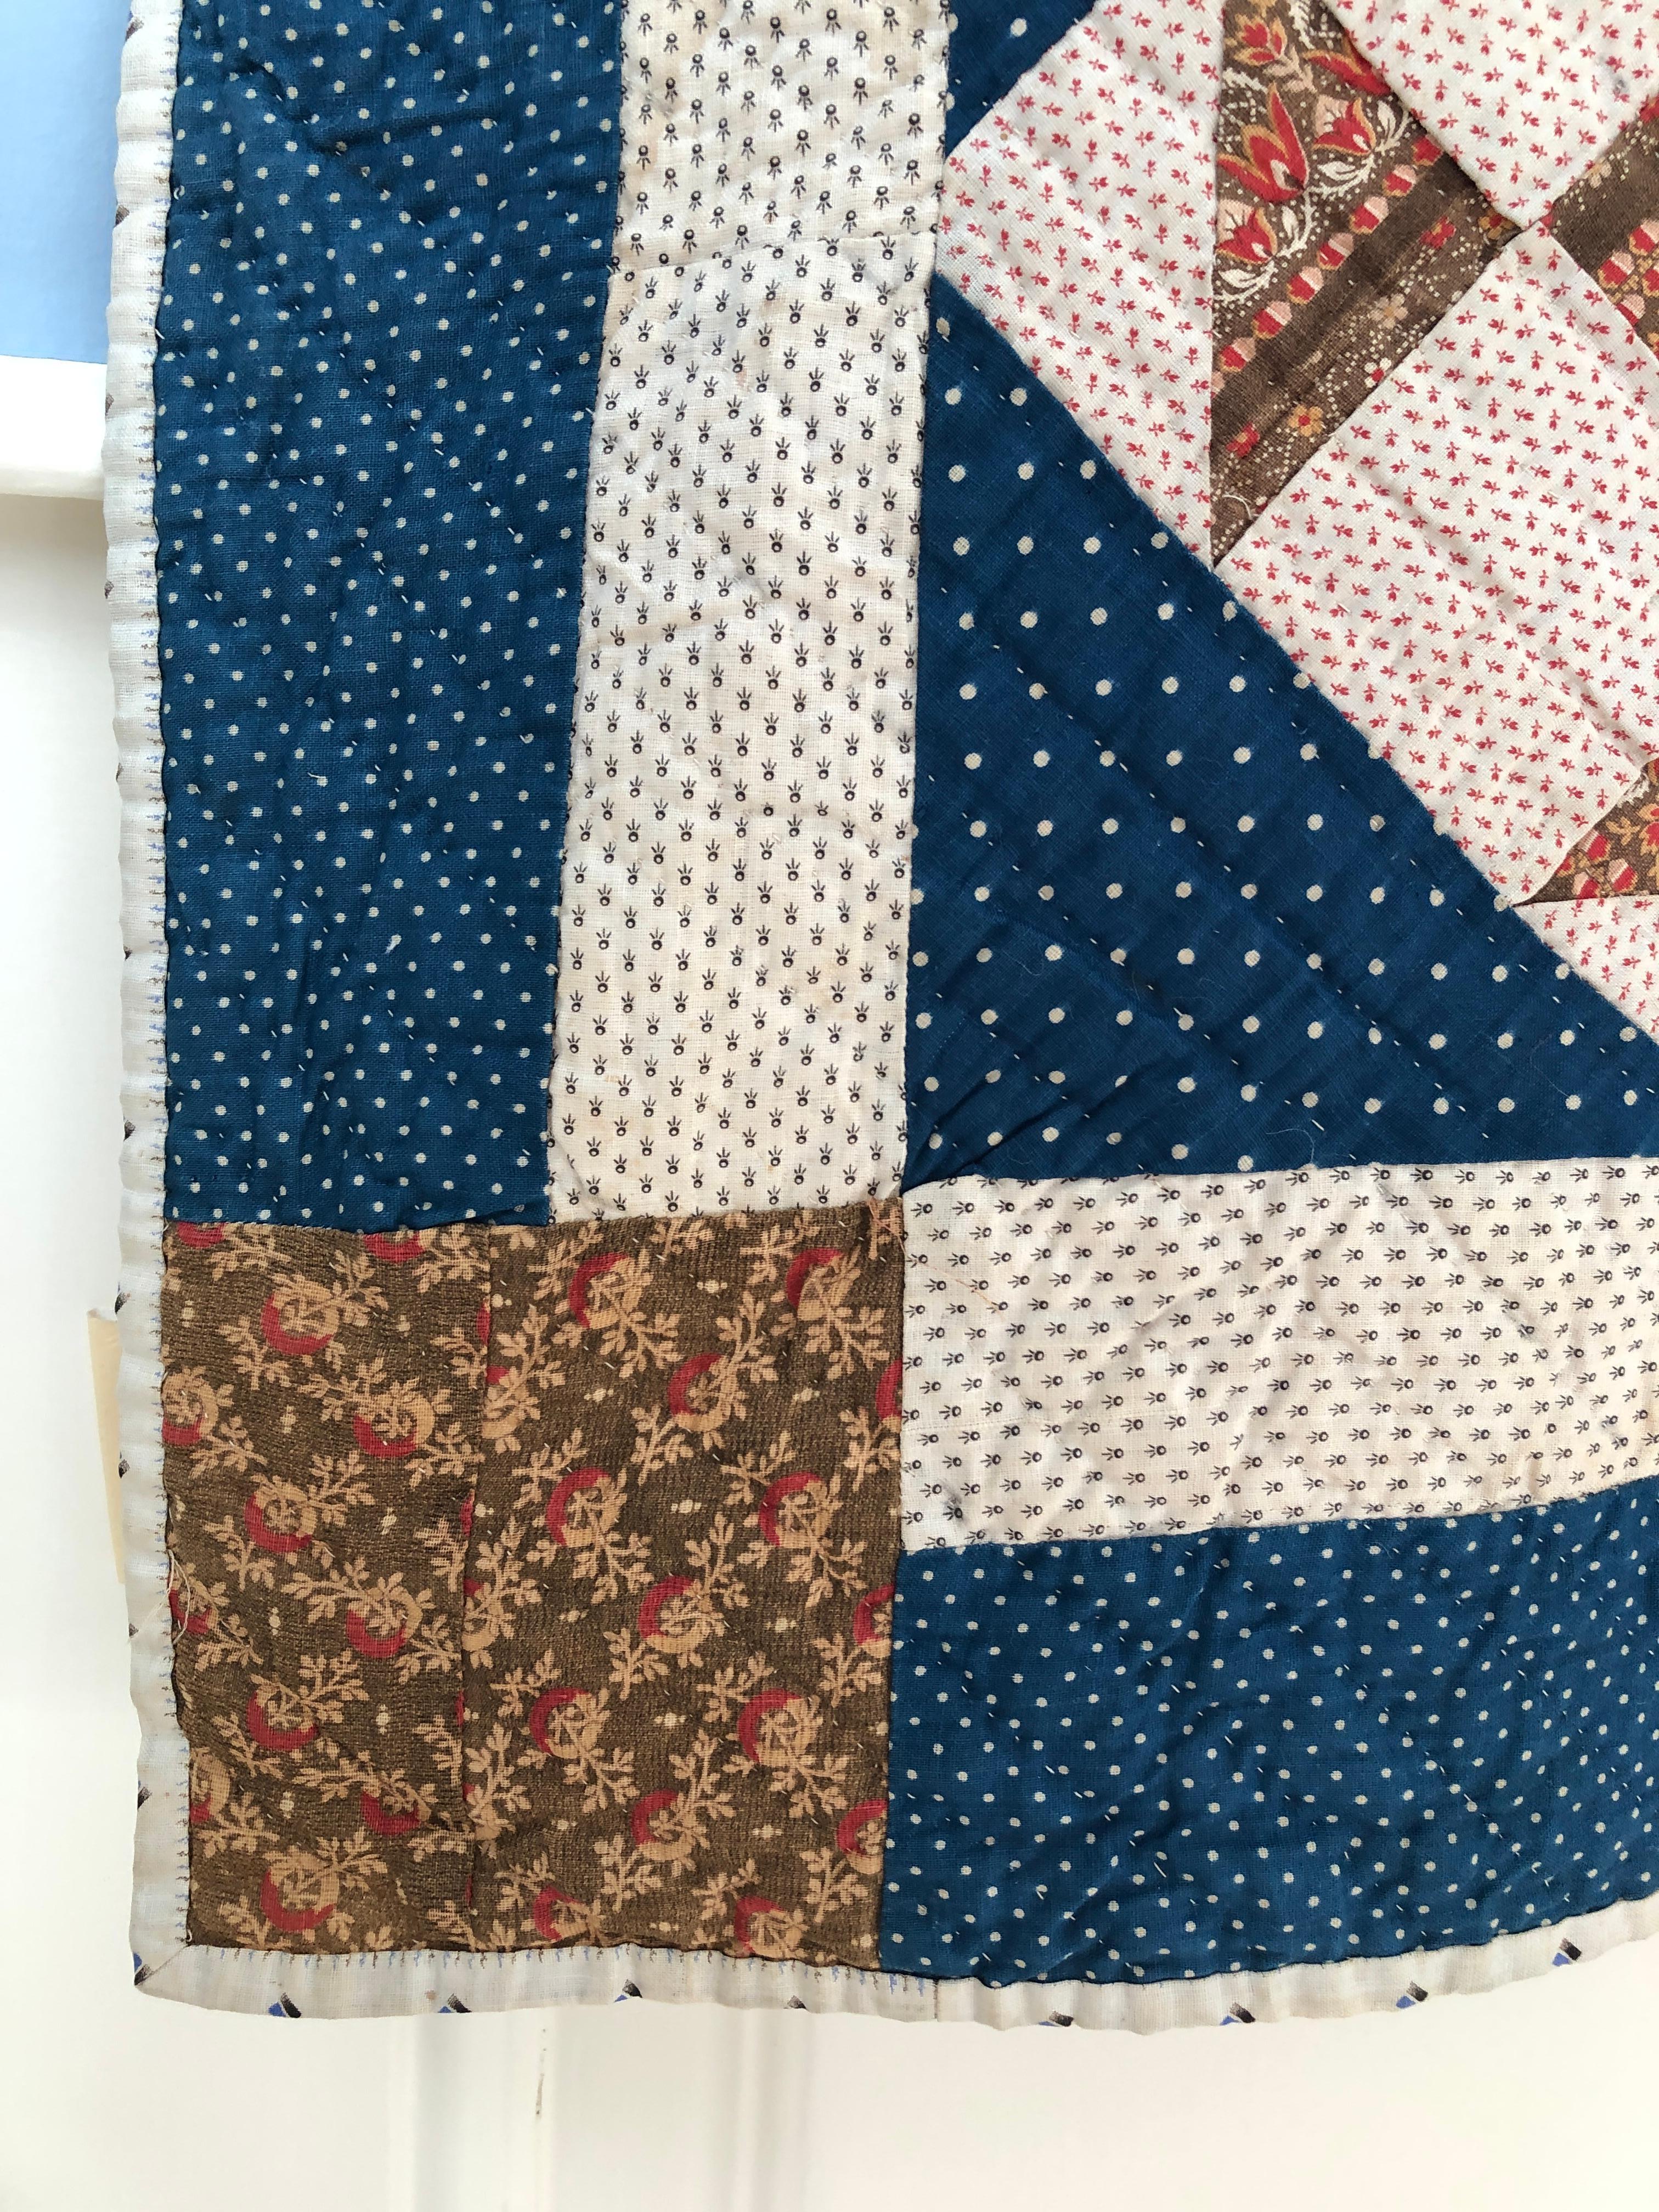 Hand-Crafted Antique Handmade Patchwork Quilt in Blue, White and Pink, USA, 1880s